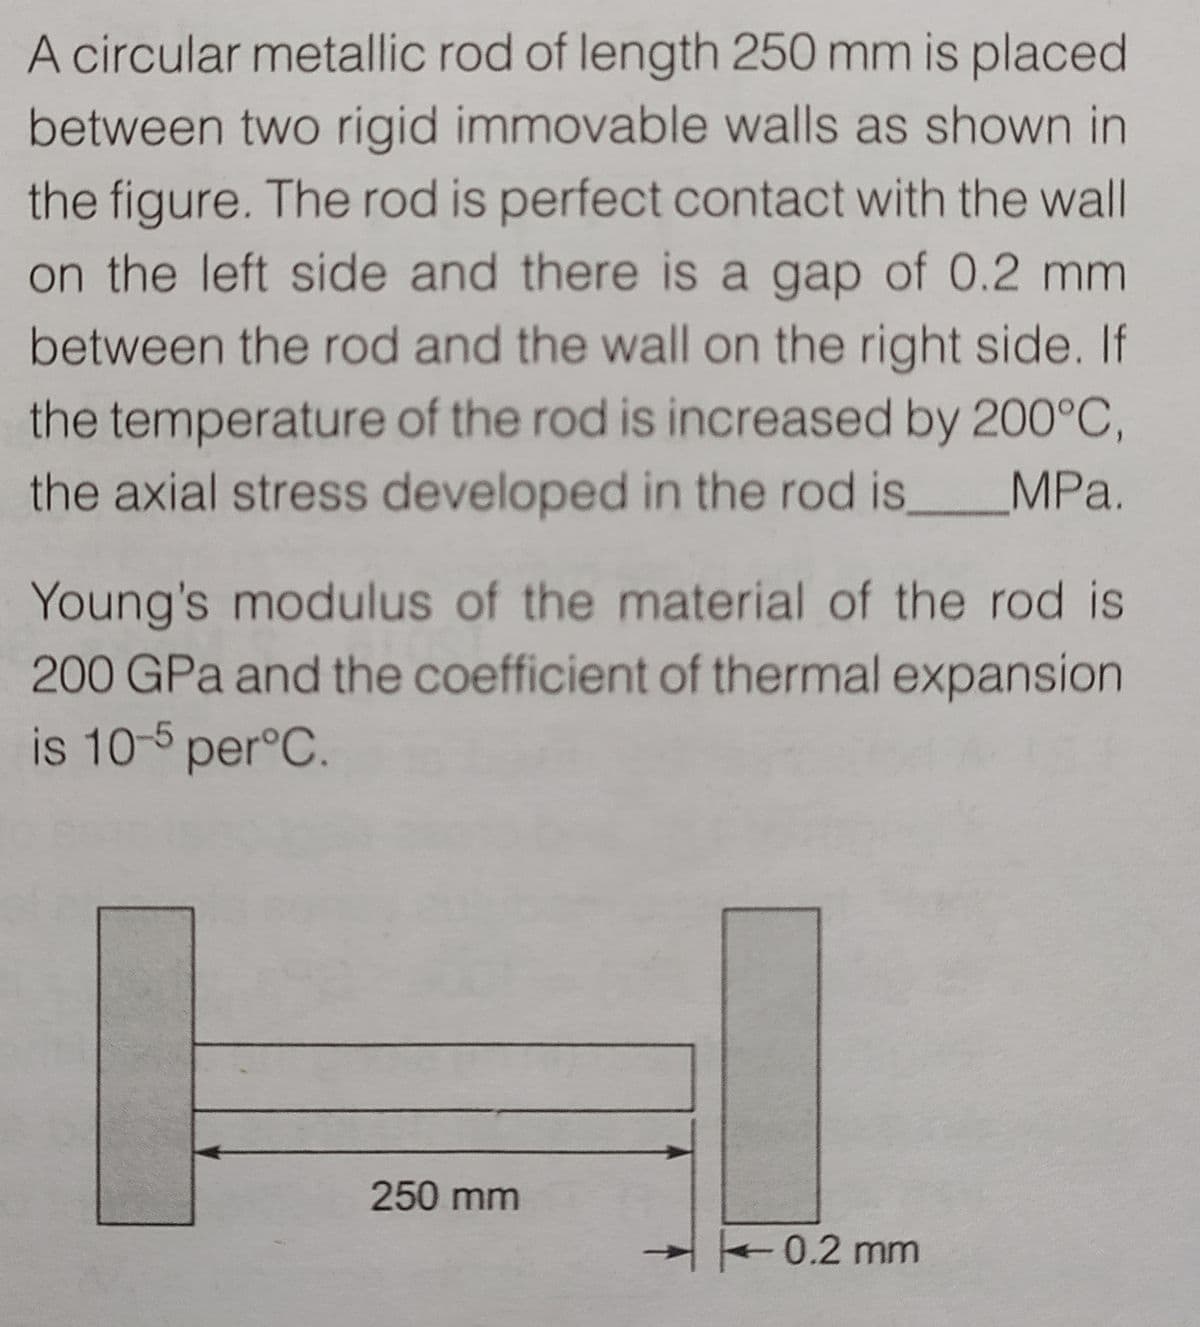 A circular metallic rod of length 250 mm is placed
between two rigid immovable walls as shown in
the figure. The rod is perfect contact with the wall
on the left side and there is a gap of 0.2 mm
between the rod and the wall on the right side. If
the temperature of the rod is increased by 200°C,
the axial stress developed in the rod is,
MPa.
Young's modulus of the material of the rod is
200 GPa and the coefficient of thermal expansion
is 10-5 per°C.
250 mm
0.2 mm
